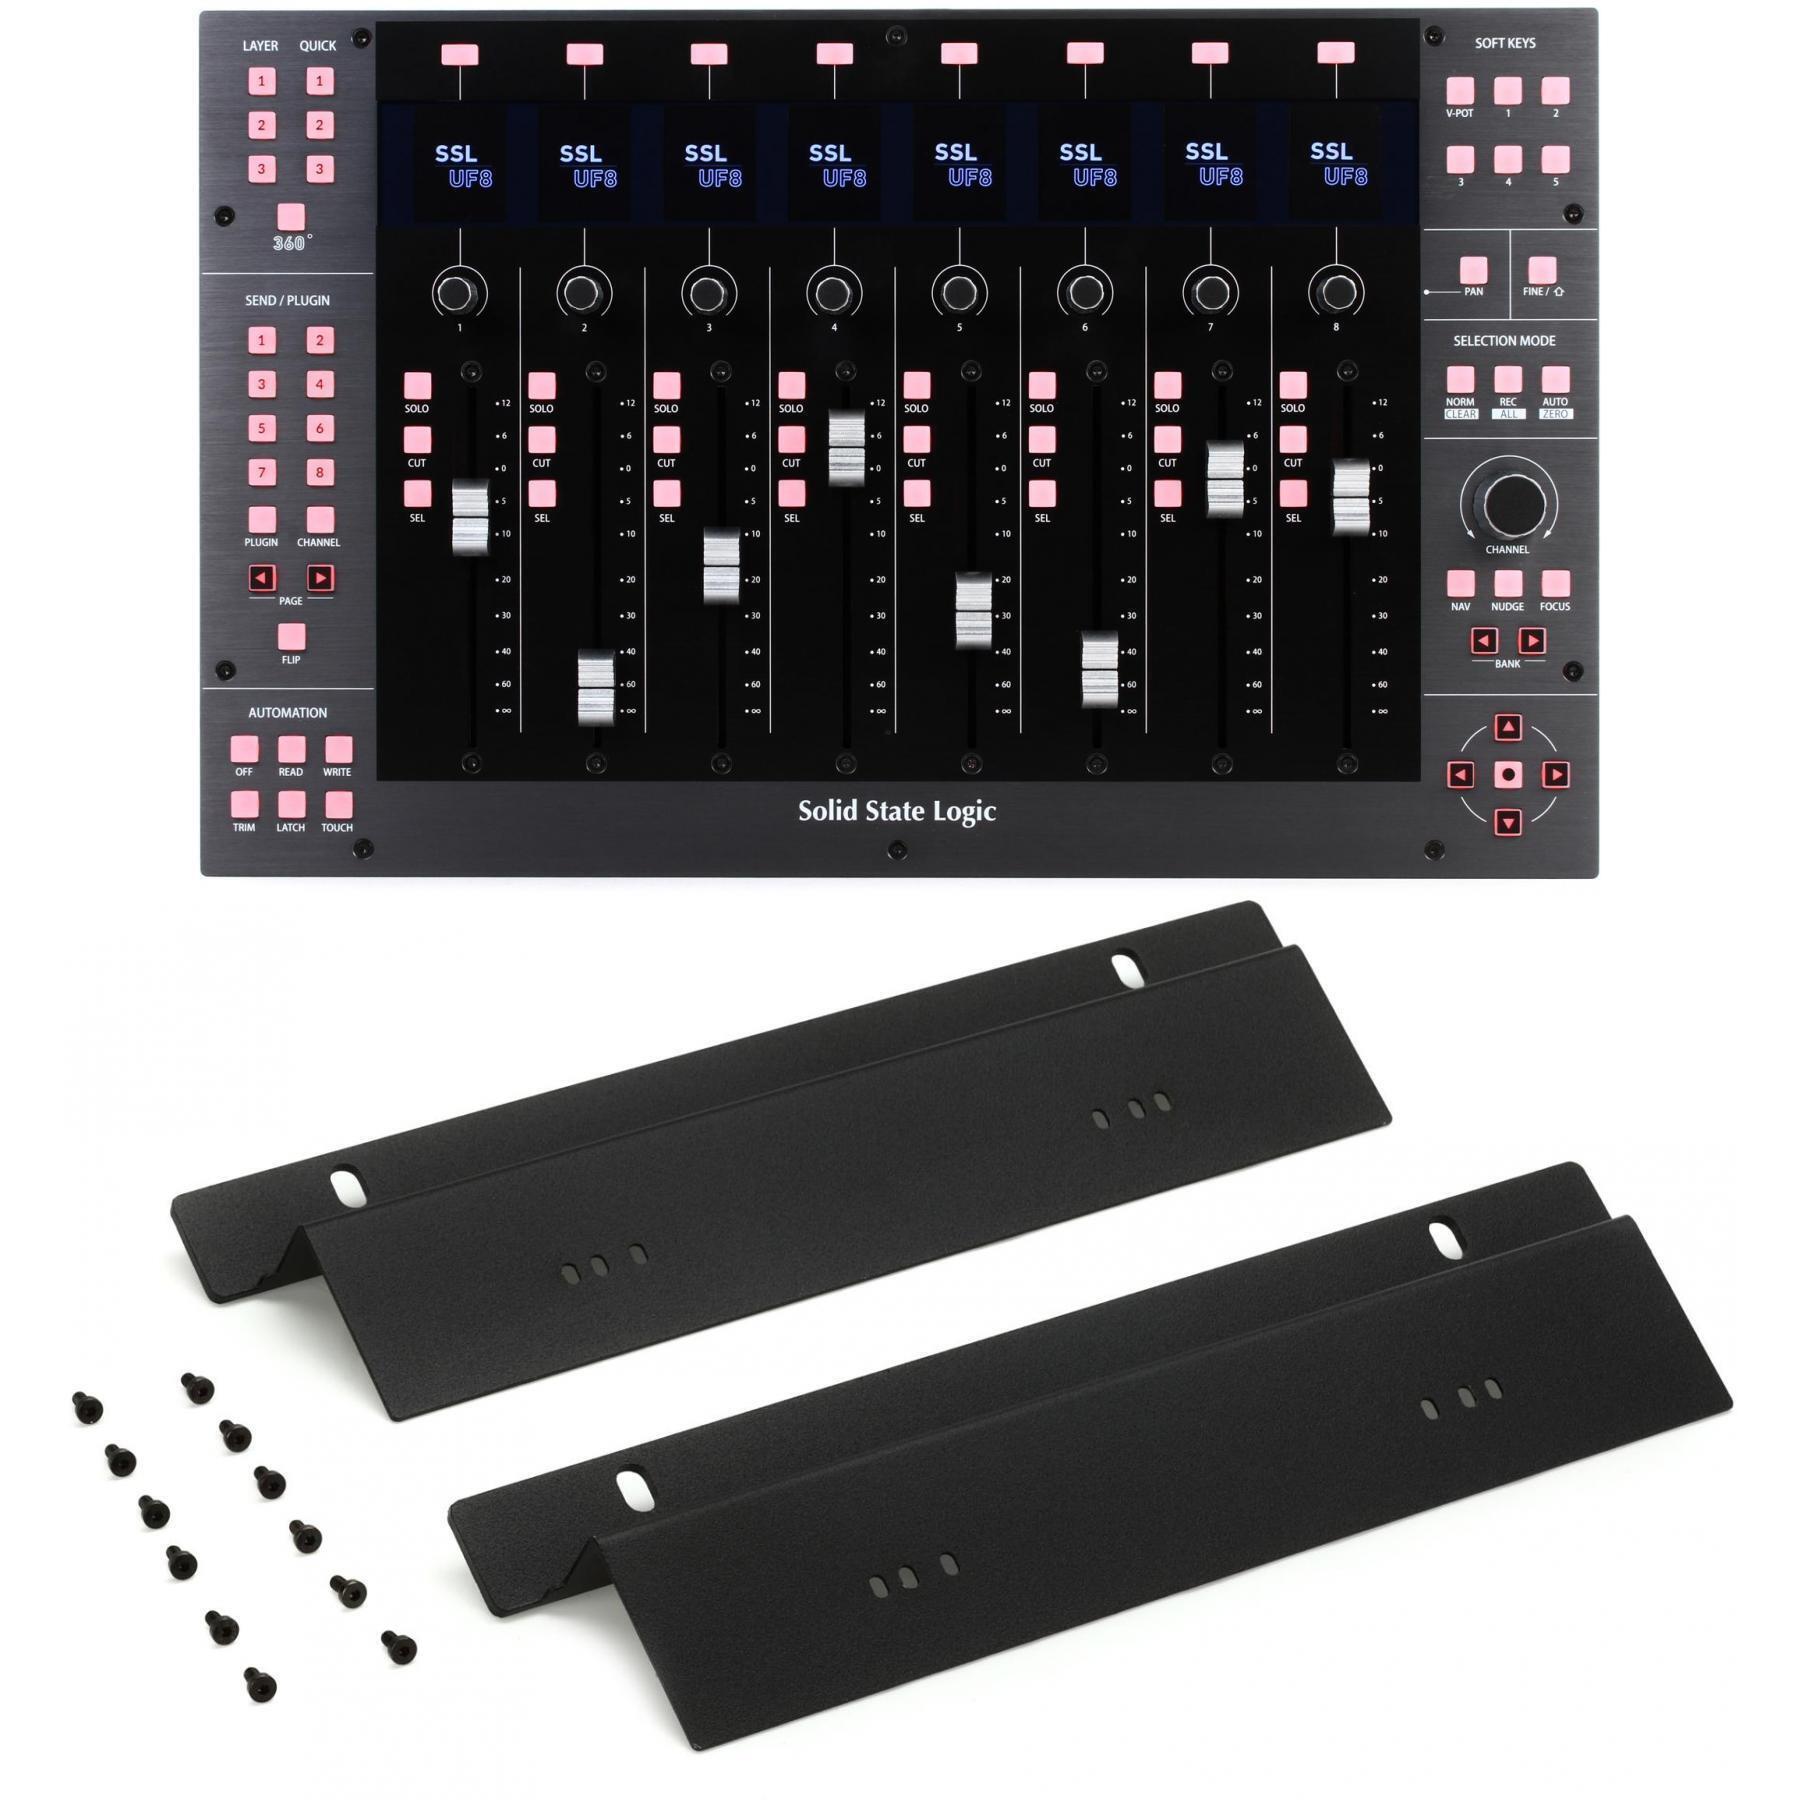 Solid State Logic UF8 Advanced DAW Controller with Rackmount Kit